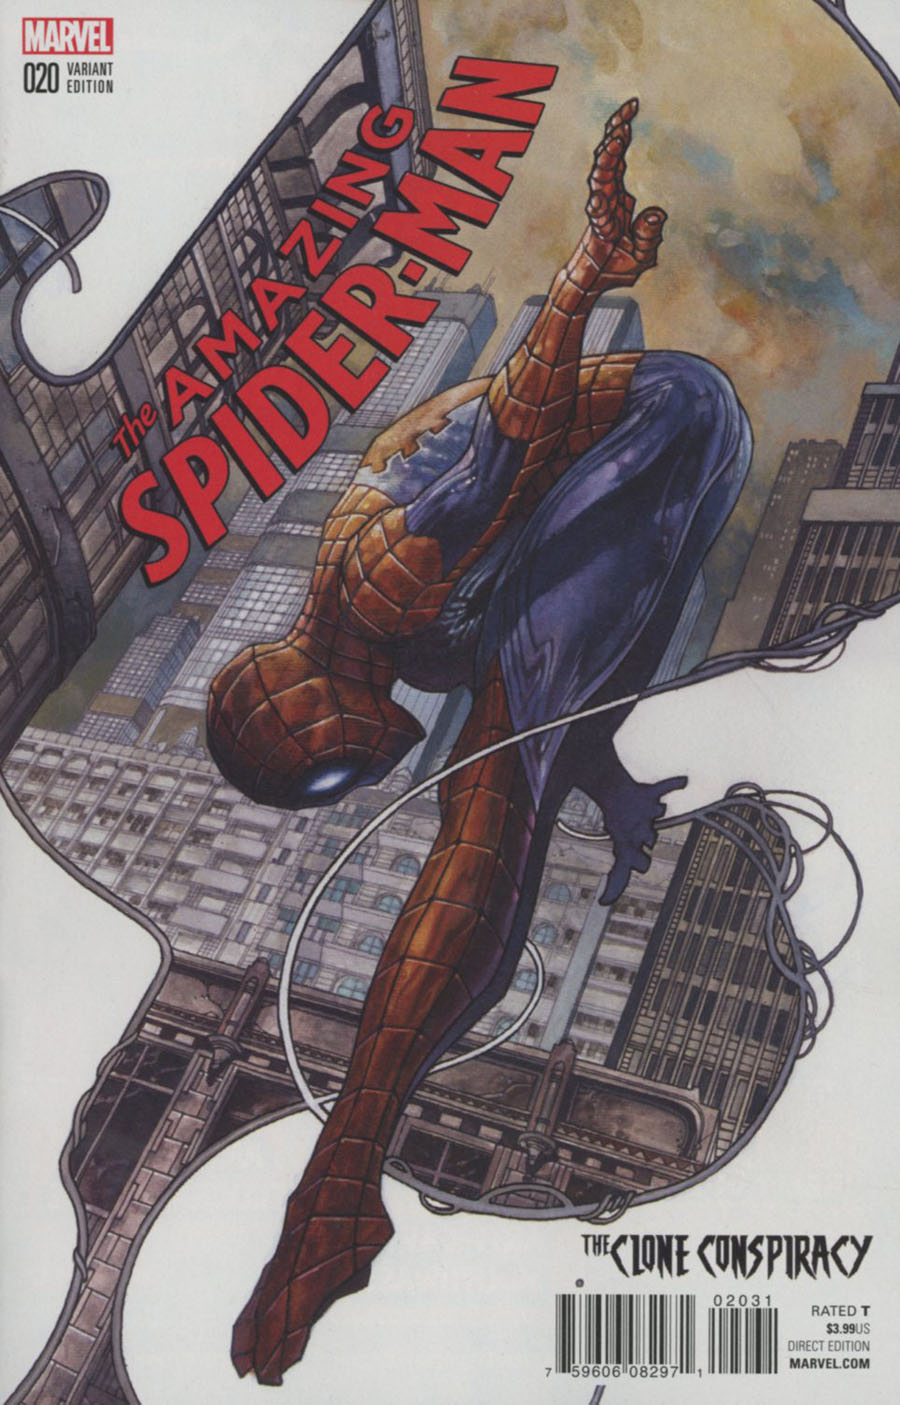 Amazing Spider-Man Vol 4 #20 Cover B Incentive Variant Cover (Clone Conspiracy Tie-In)